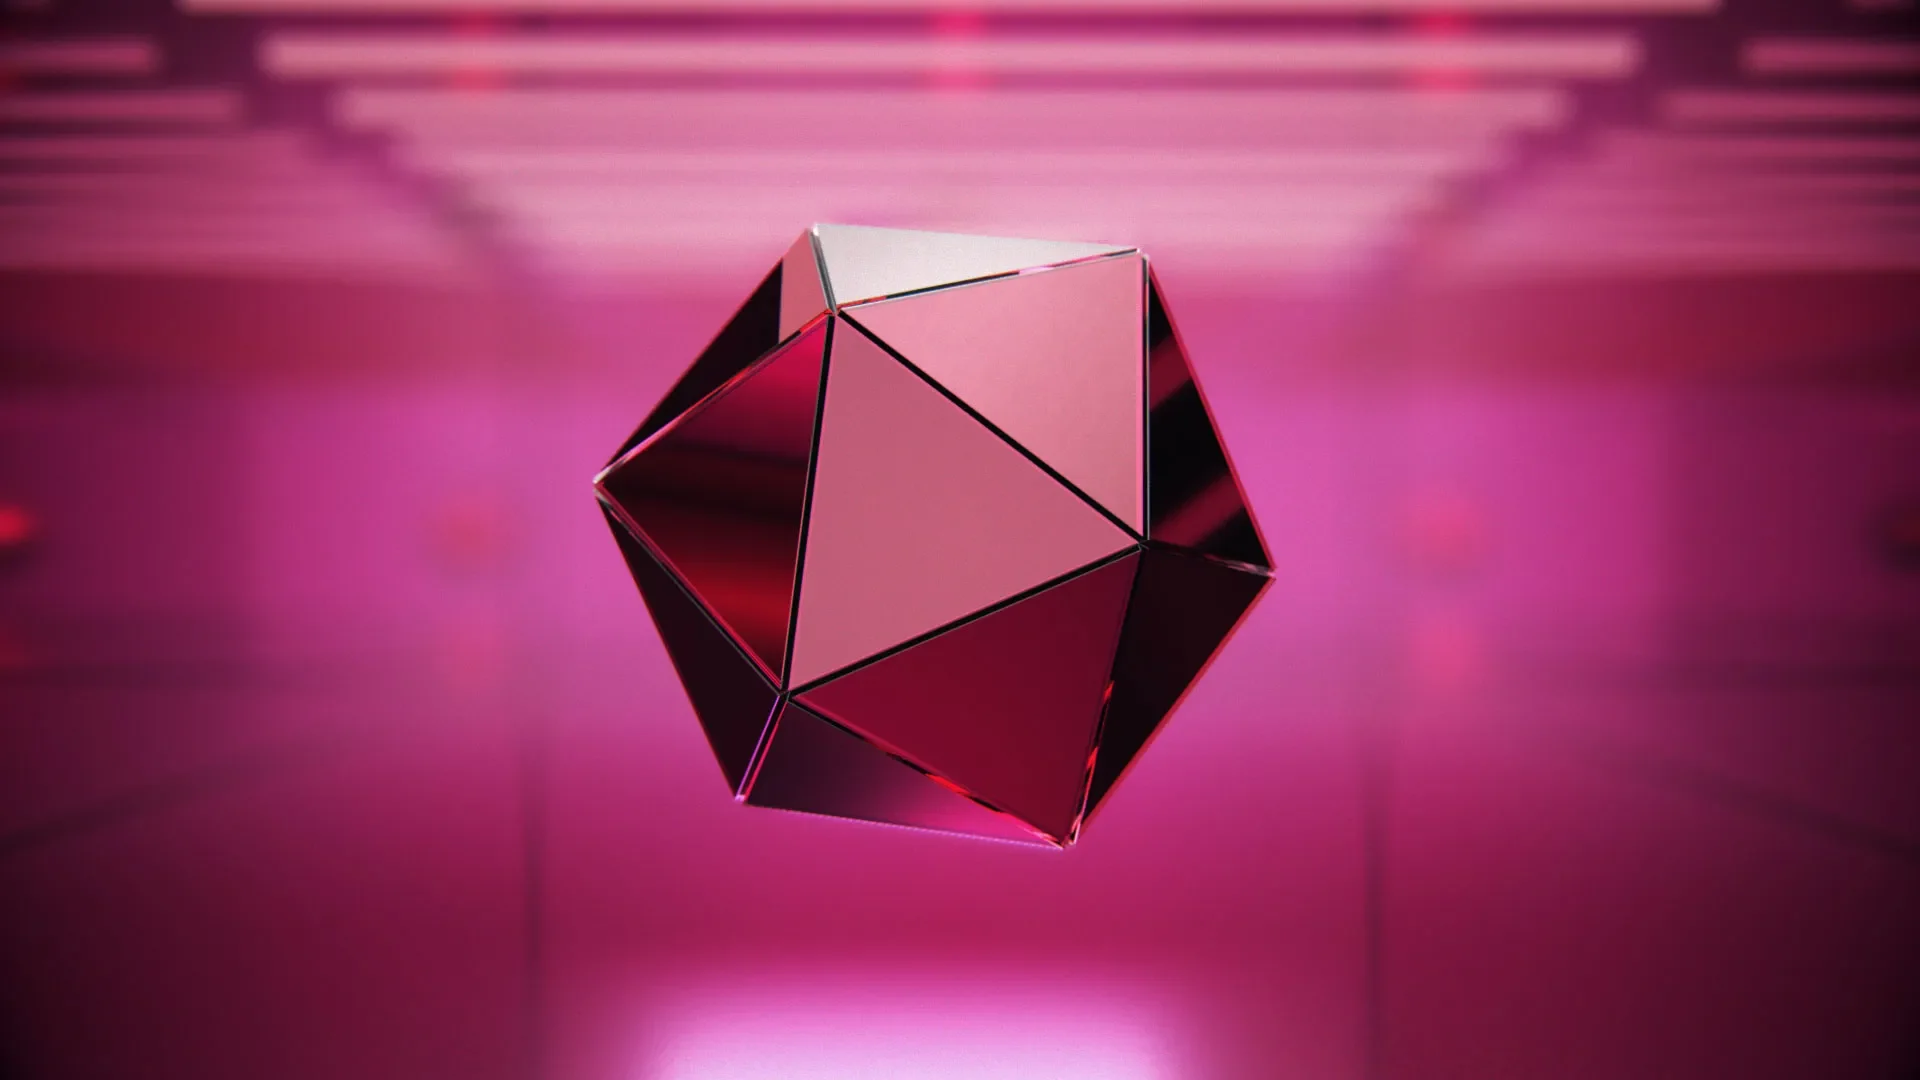 a magenta sculpure consiting out of several polygones in front of a magenta abstract room